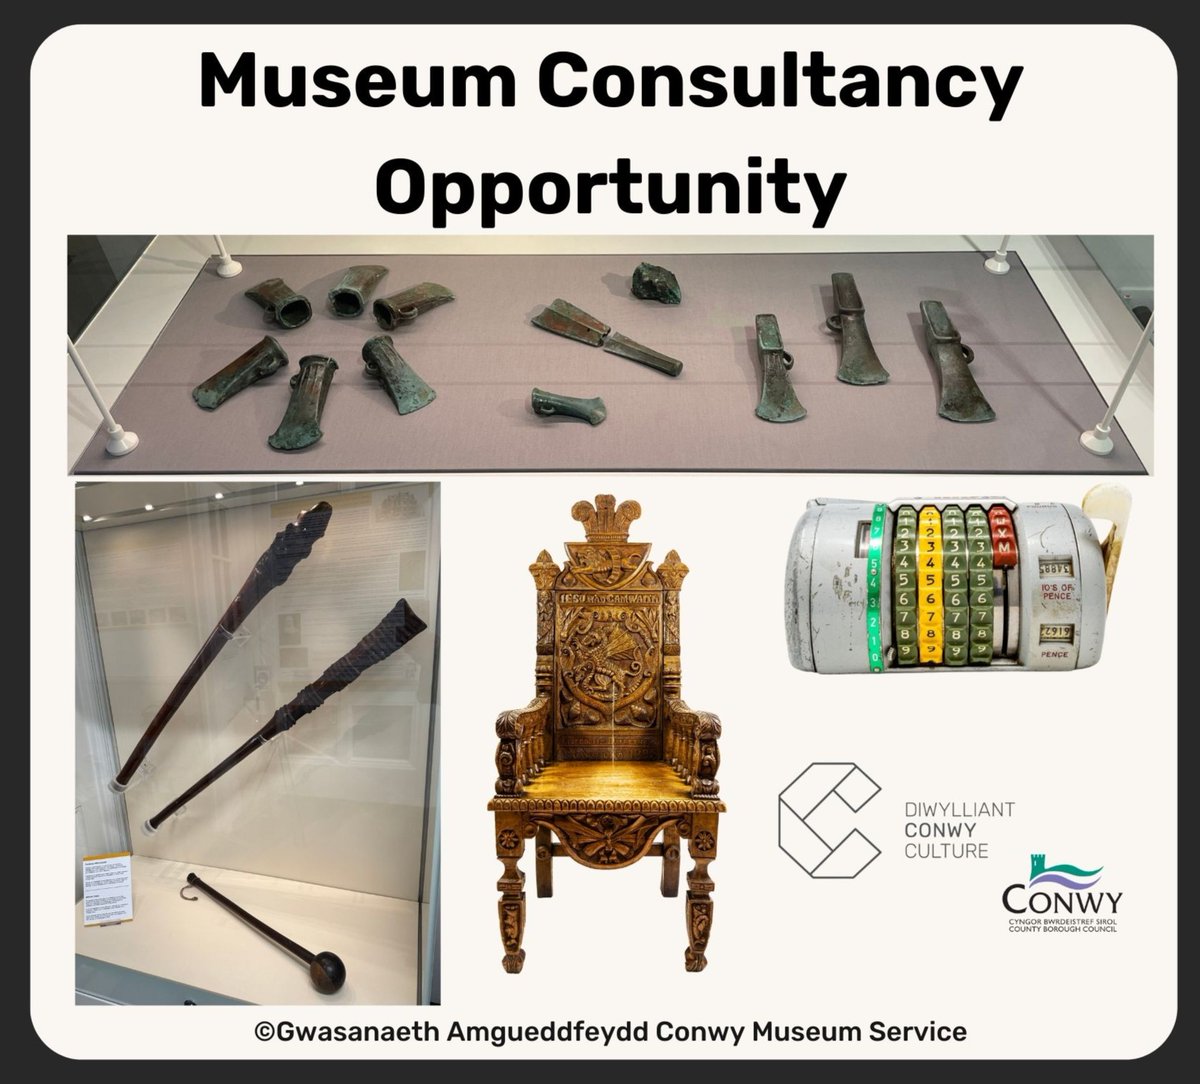 Conwy Museum Service has a Museum Consultancy opportunity available A reminder that the deadline to apply for this opportunity is 12pm on Tuesday 9th April 📝⌛ For more information please visit: bit.ly/3VruBKe #Museums #Conwy #NorthWales